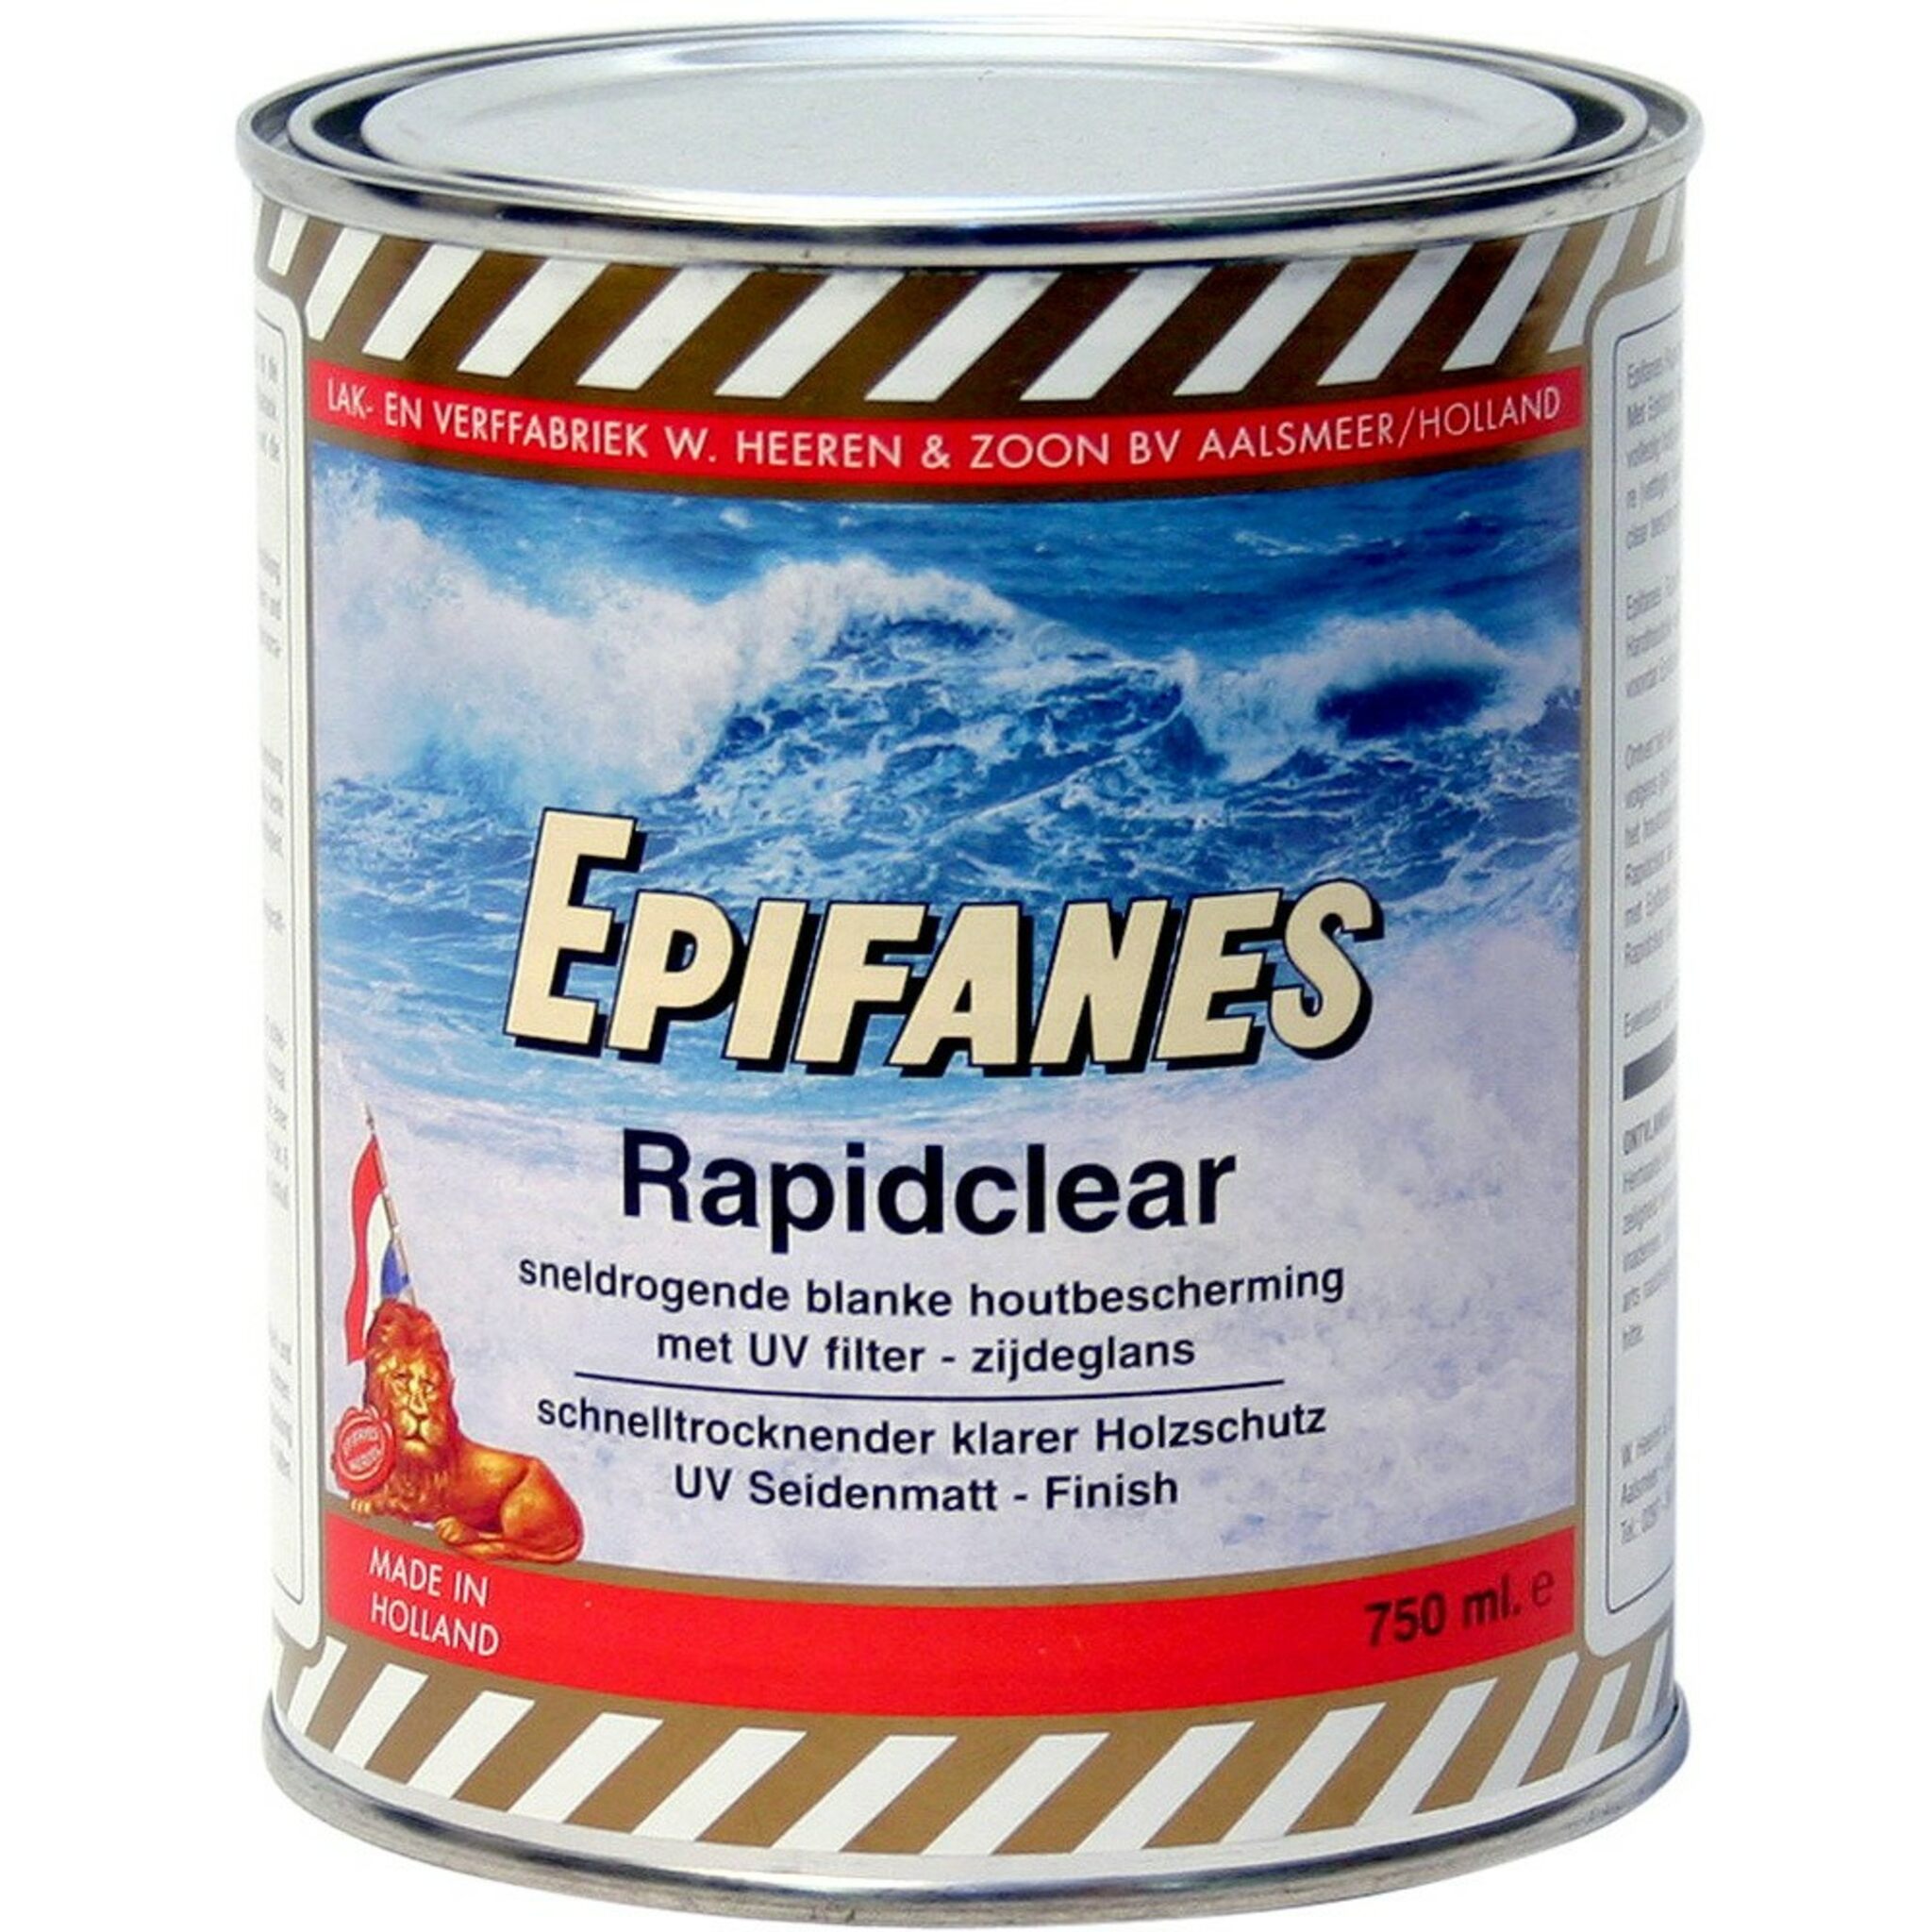 EPIFANES Rapidclear 750ml